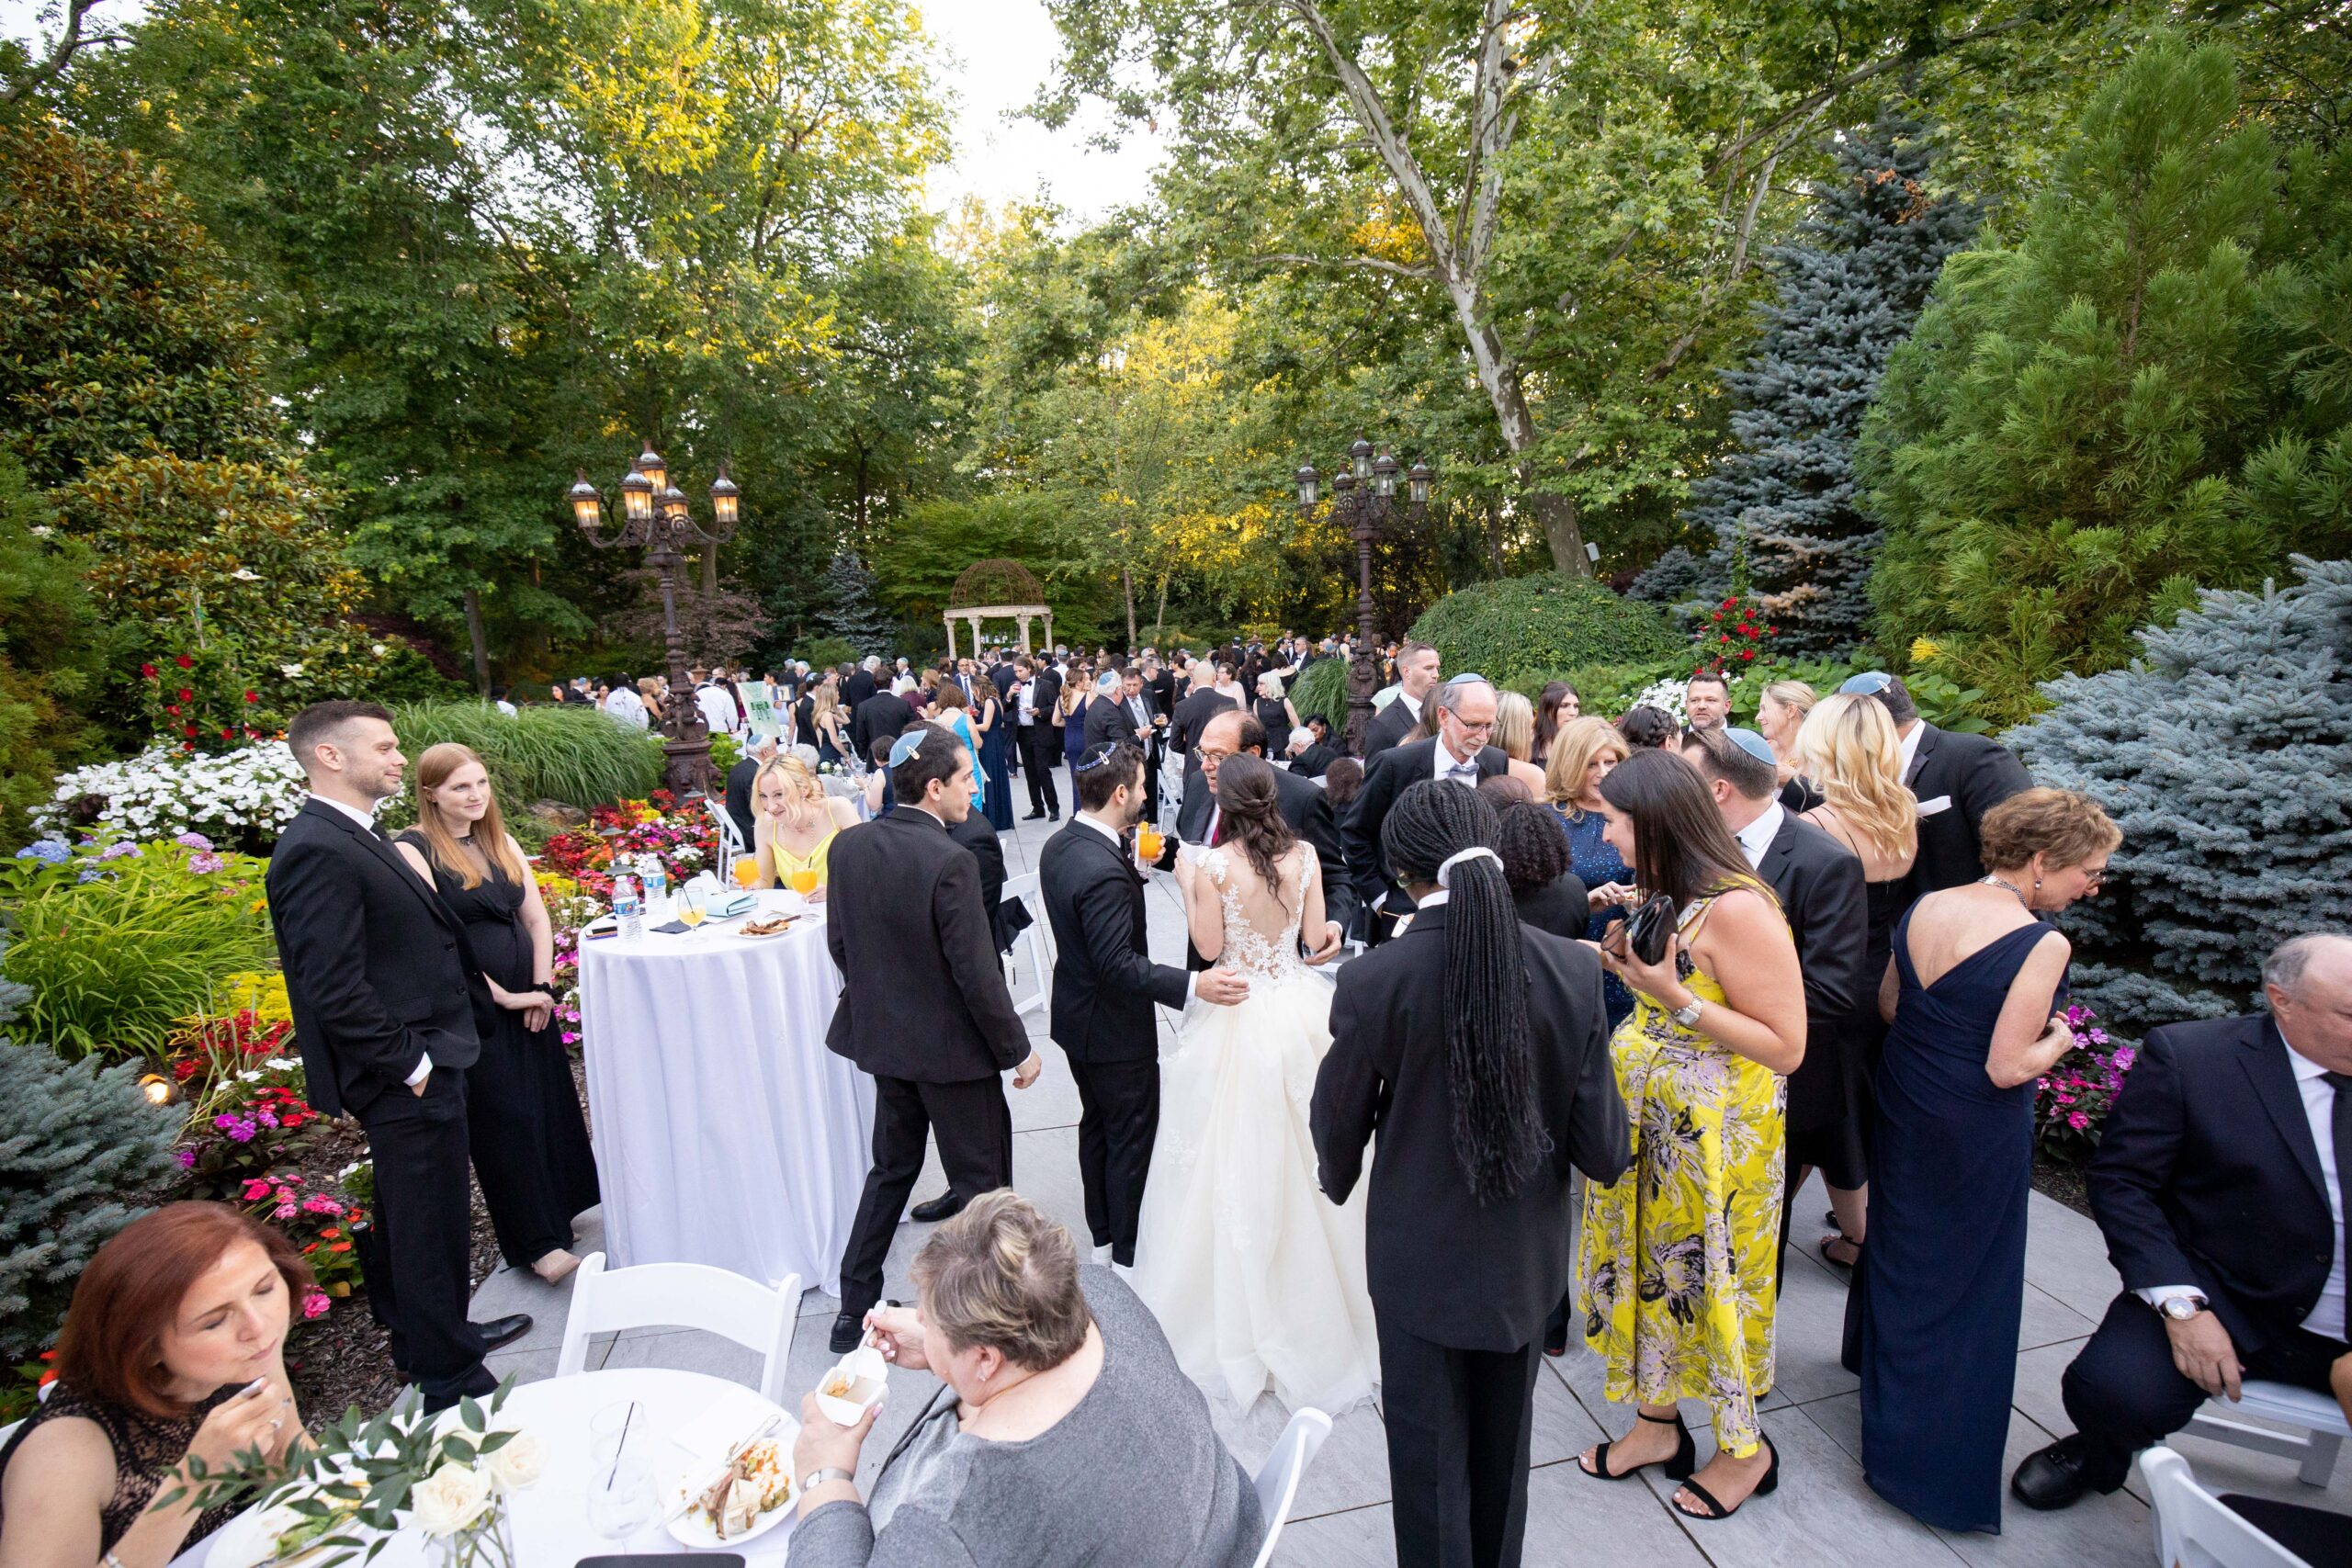 Bride, groom, and guests mingle during cocktail hour in the lush Gardens at Crystal Plaza.